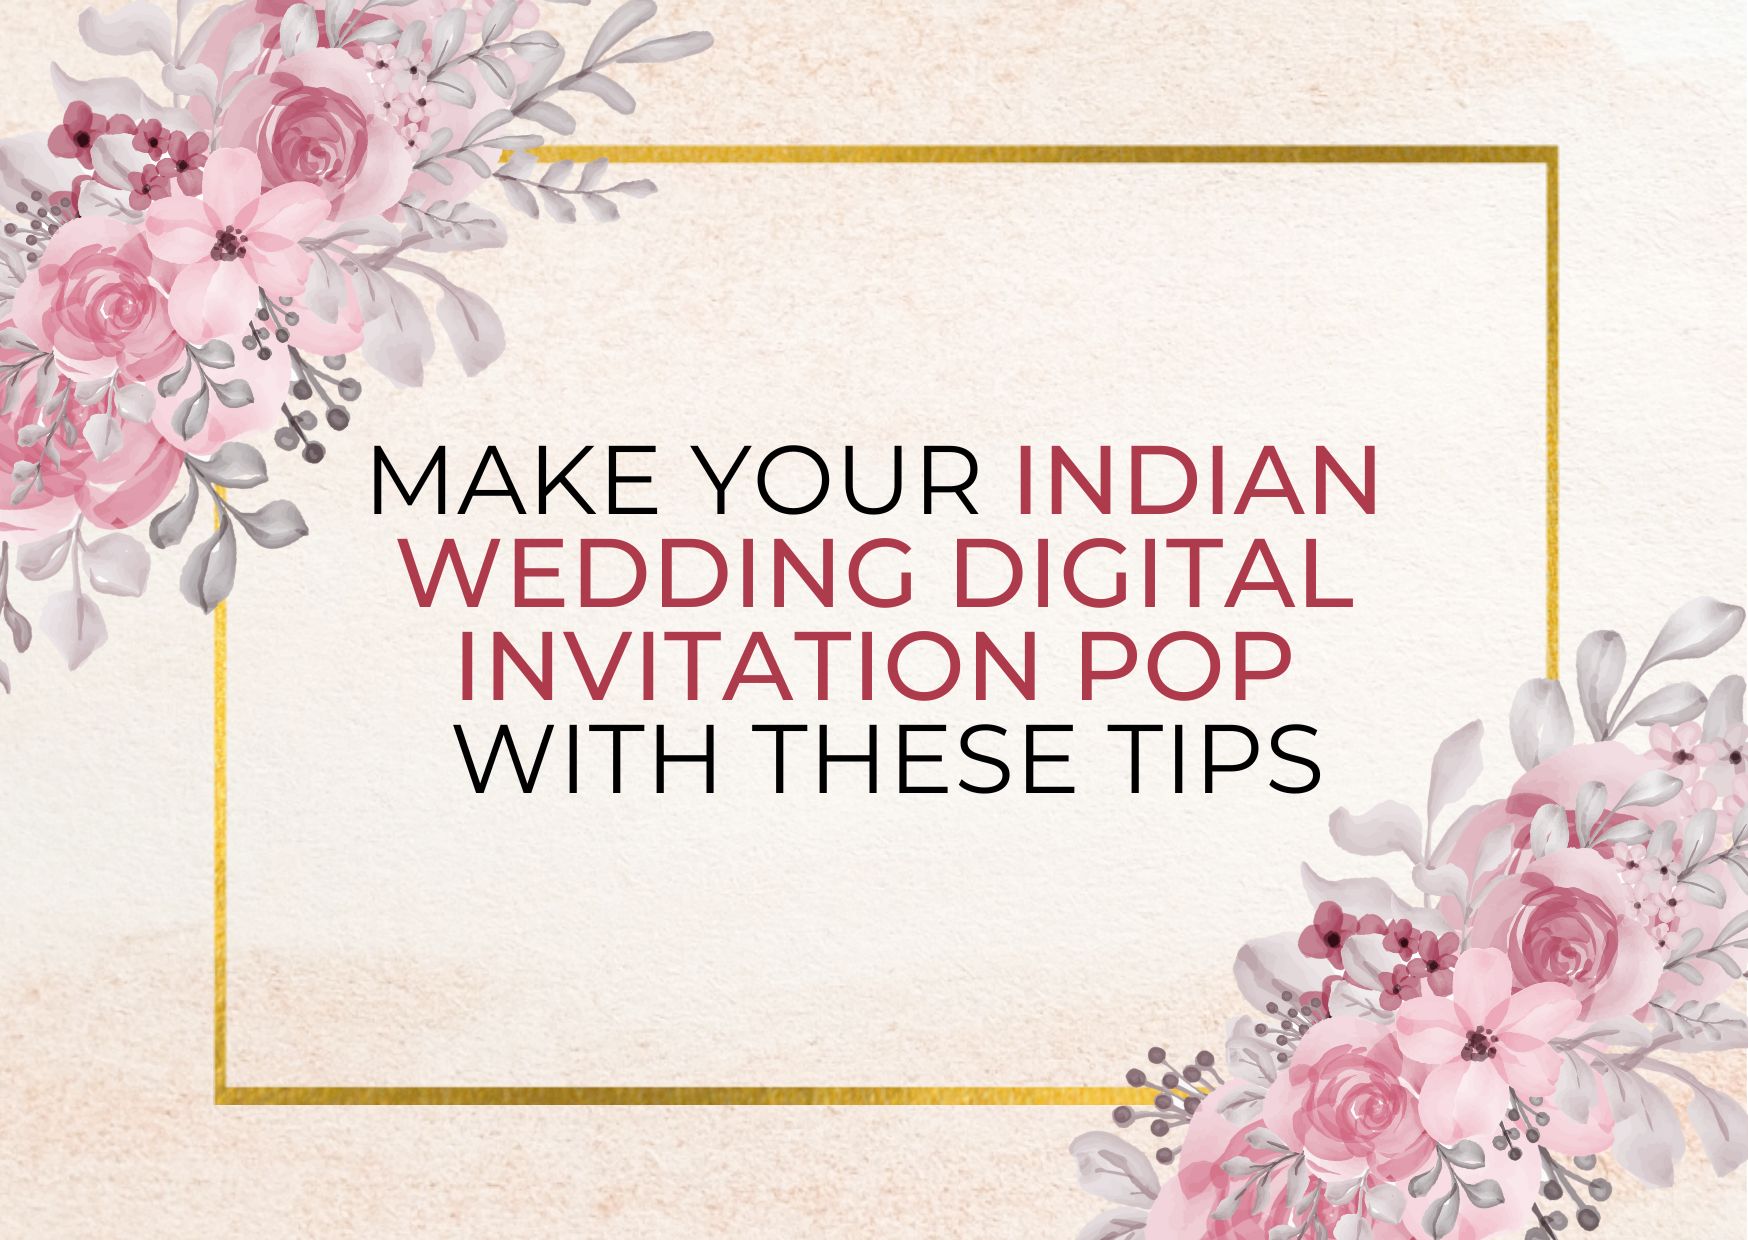 Make Your Indian Wedding Digital Invitation Pop With These Tips